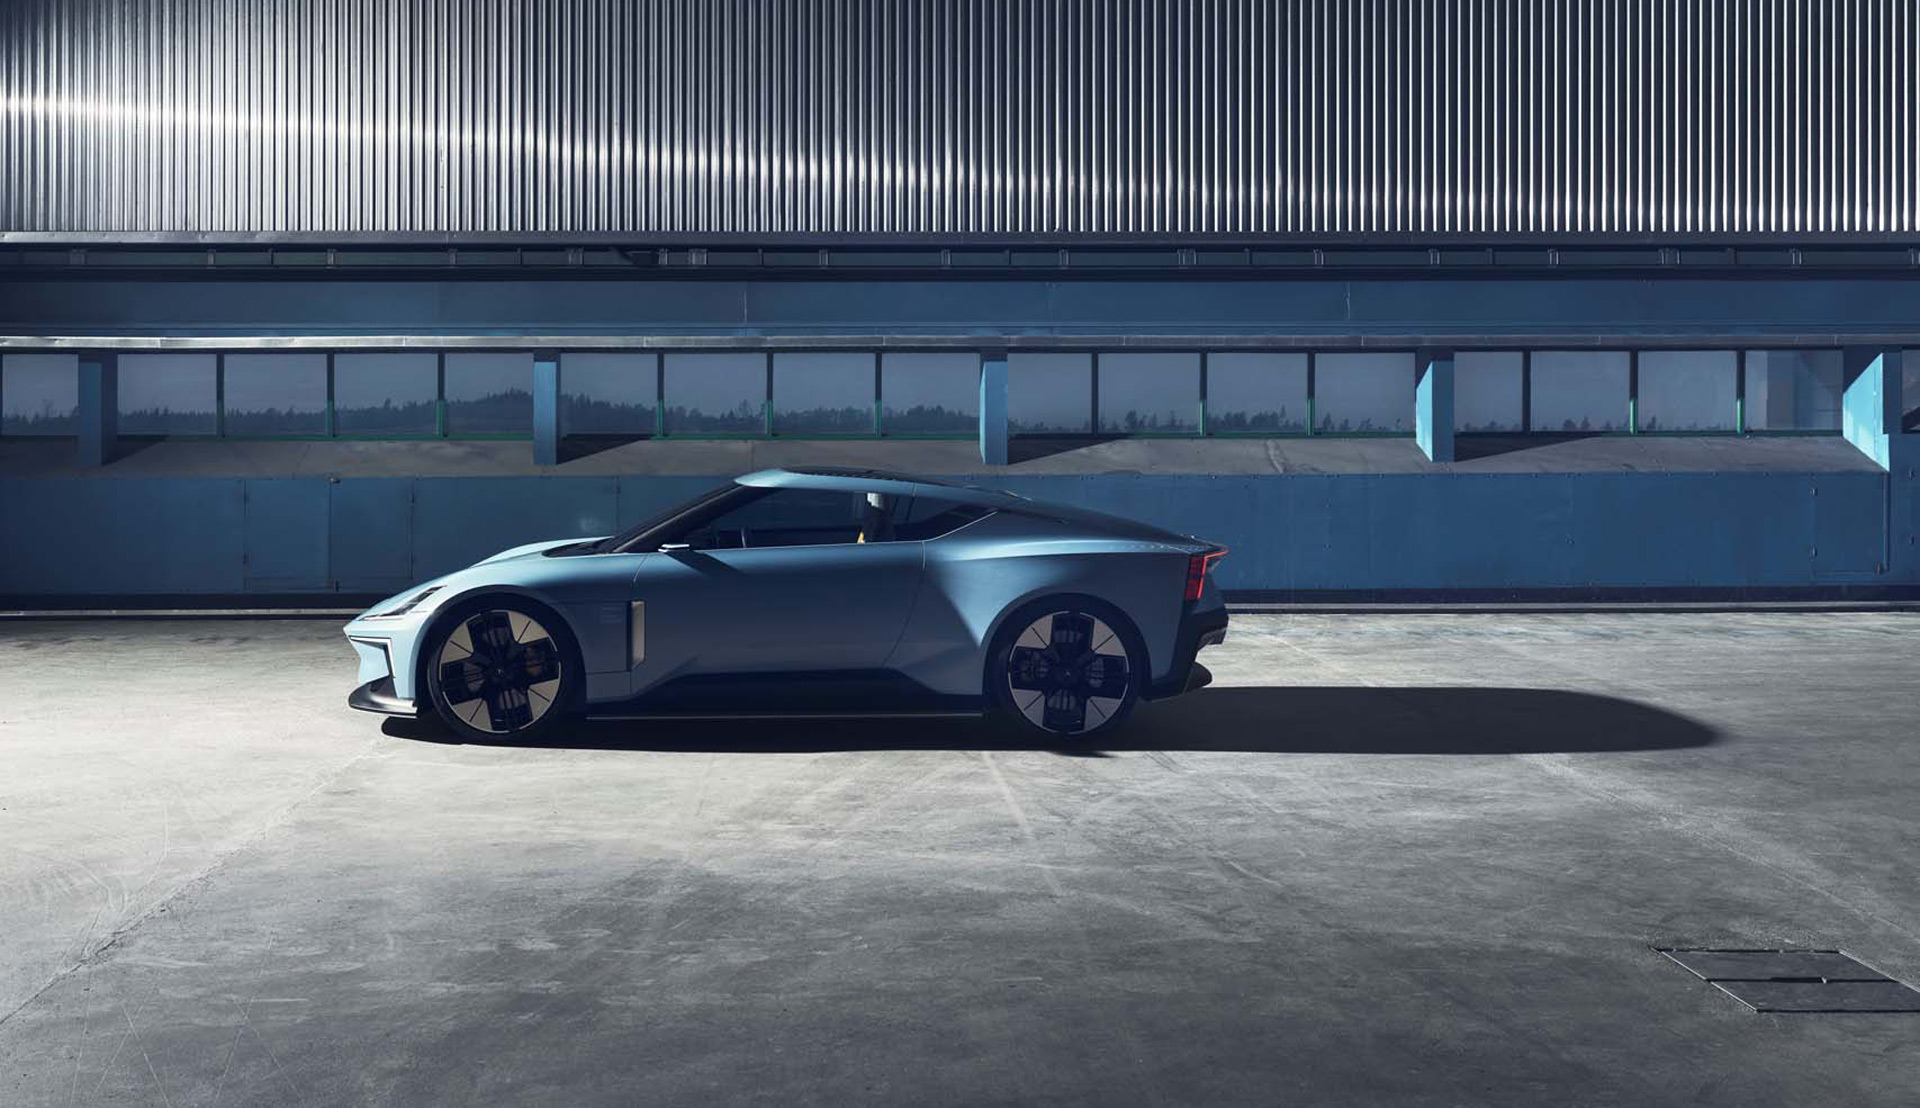 Polestar 6 electric roadster confirmed for production in 2026, chasing Tesla Roadster 2.0